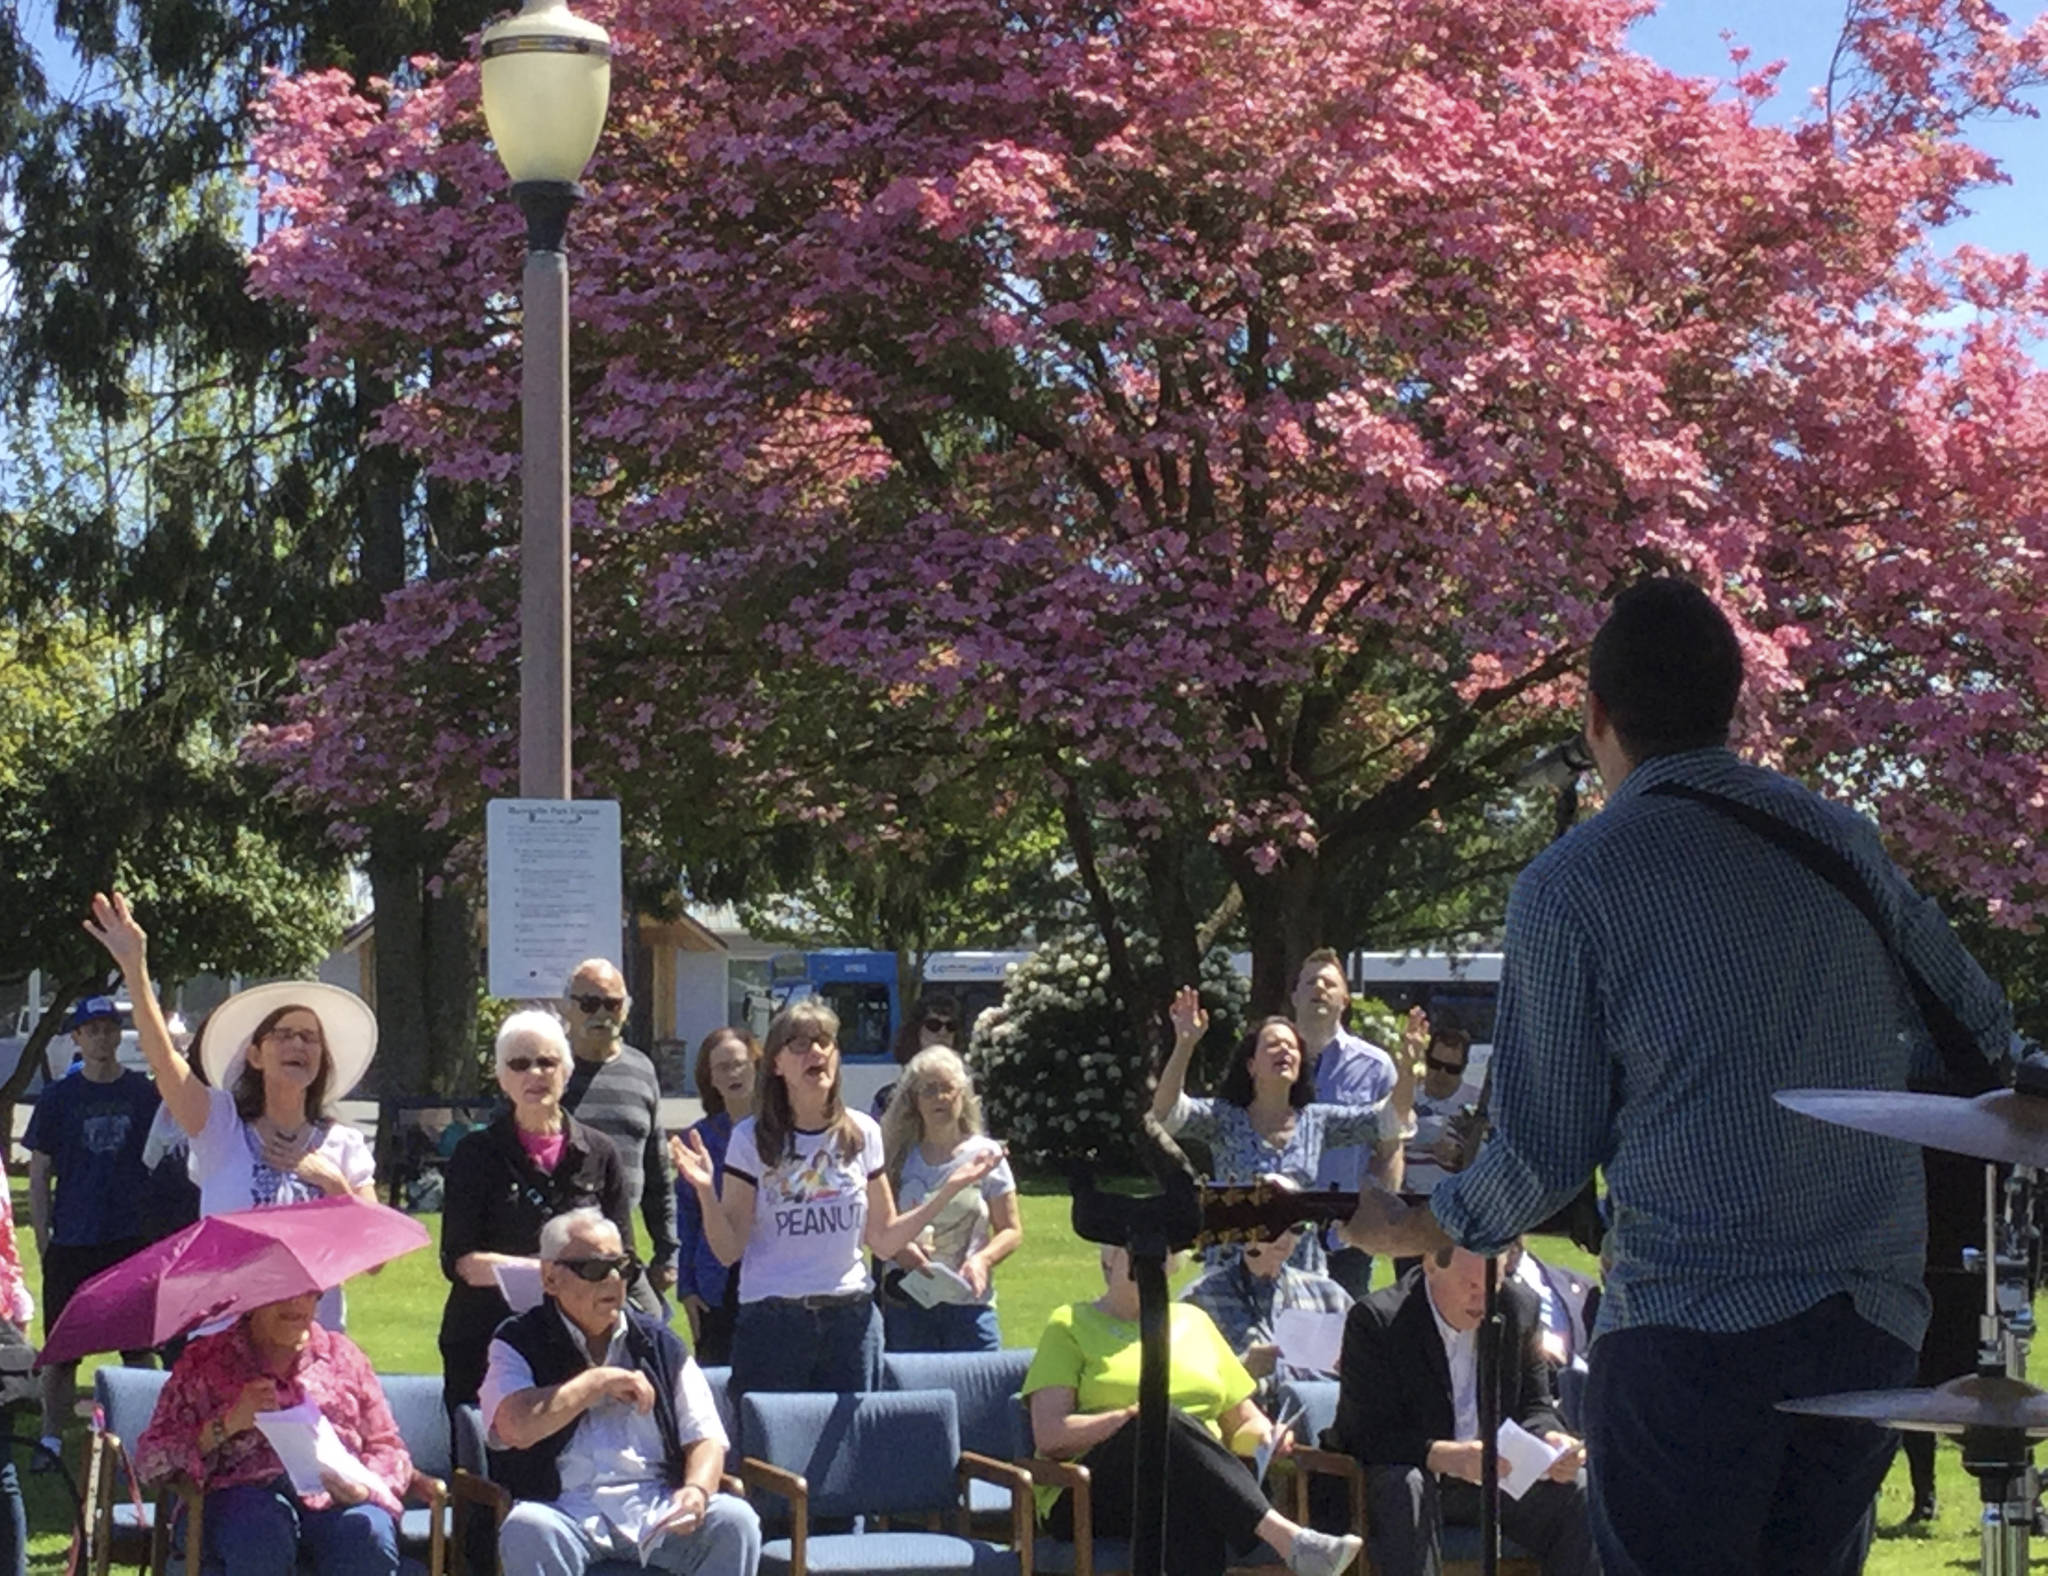 Parishioners and park-goers gathered for National Day of Prayer on Thursday in Comeford Park in Marysville.